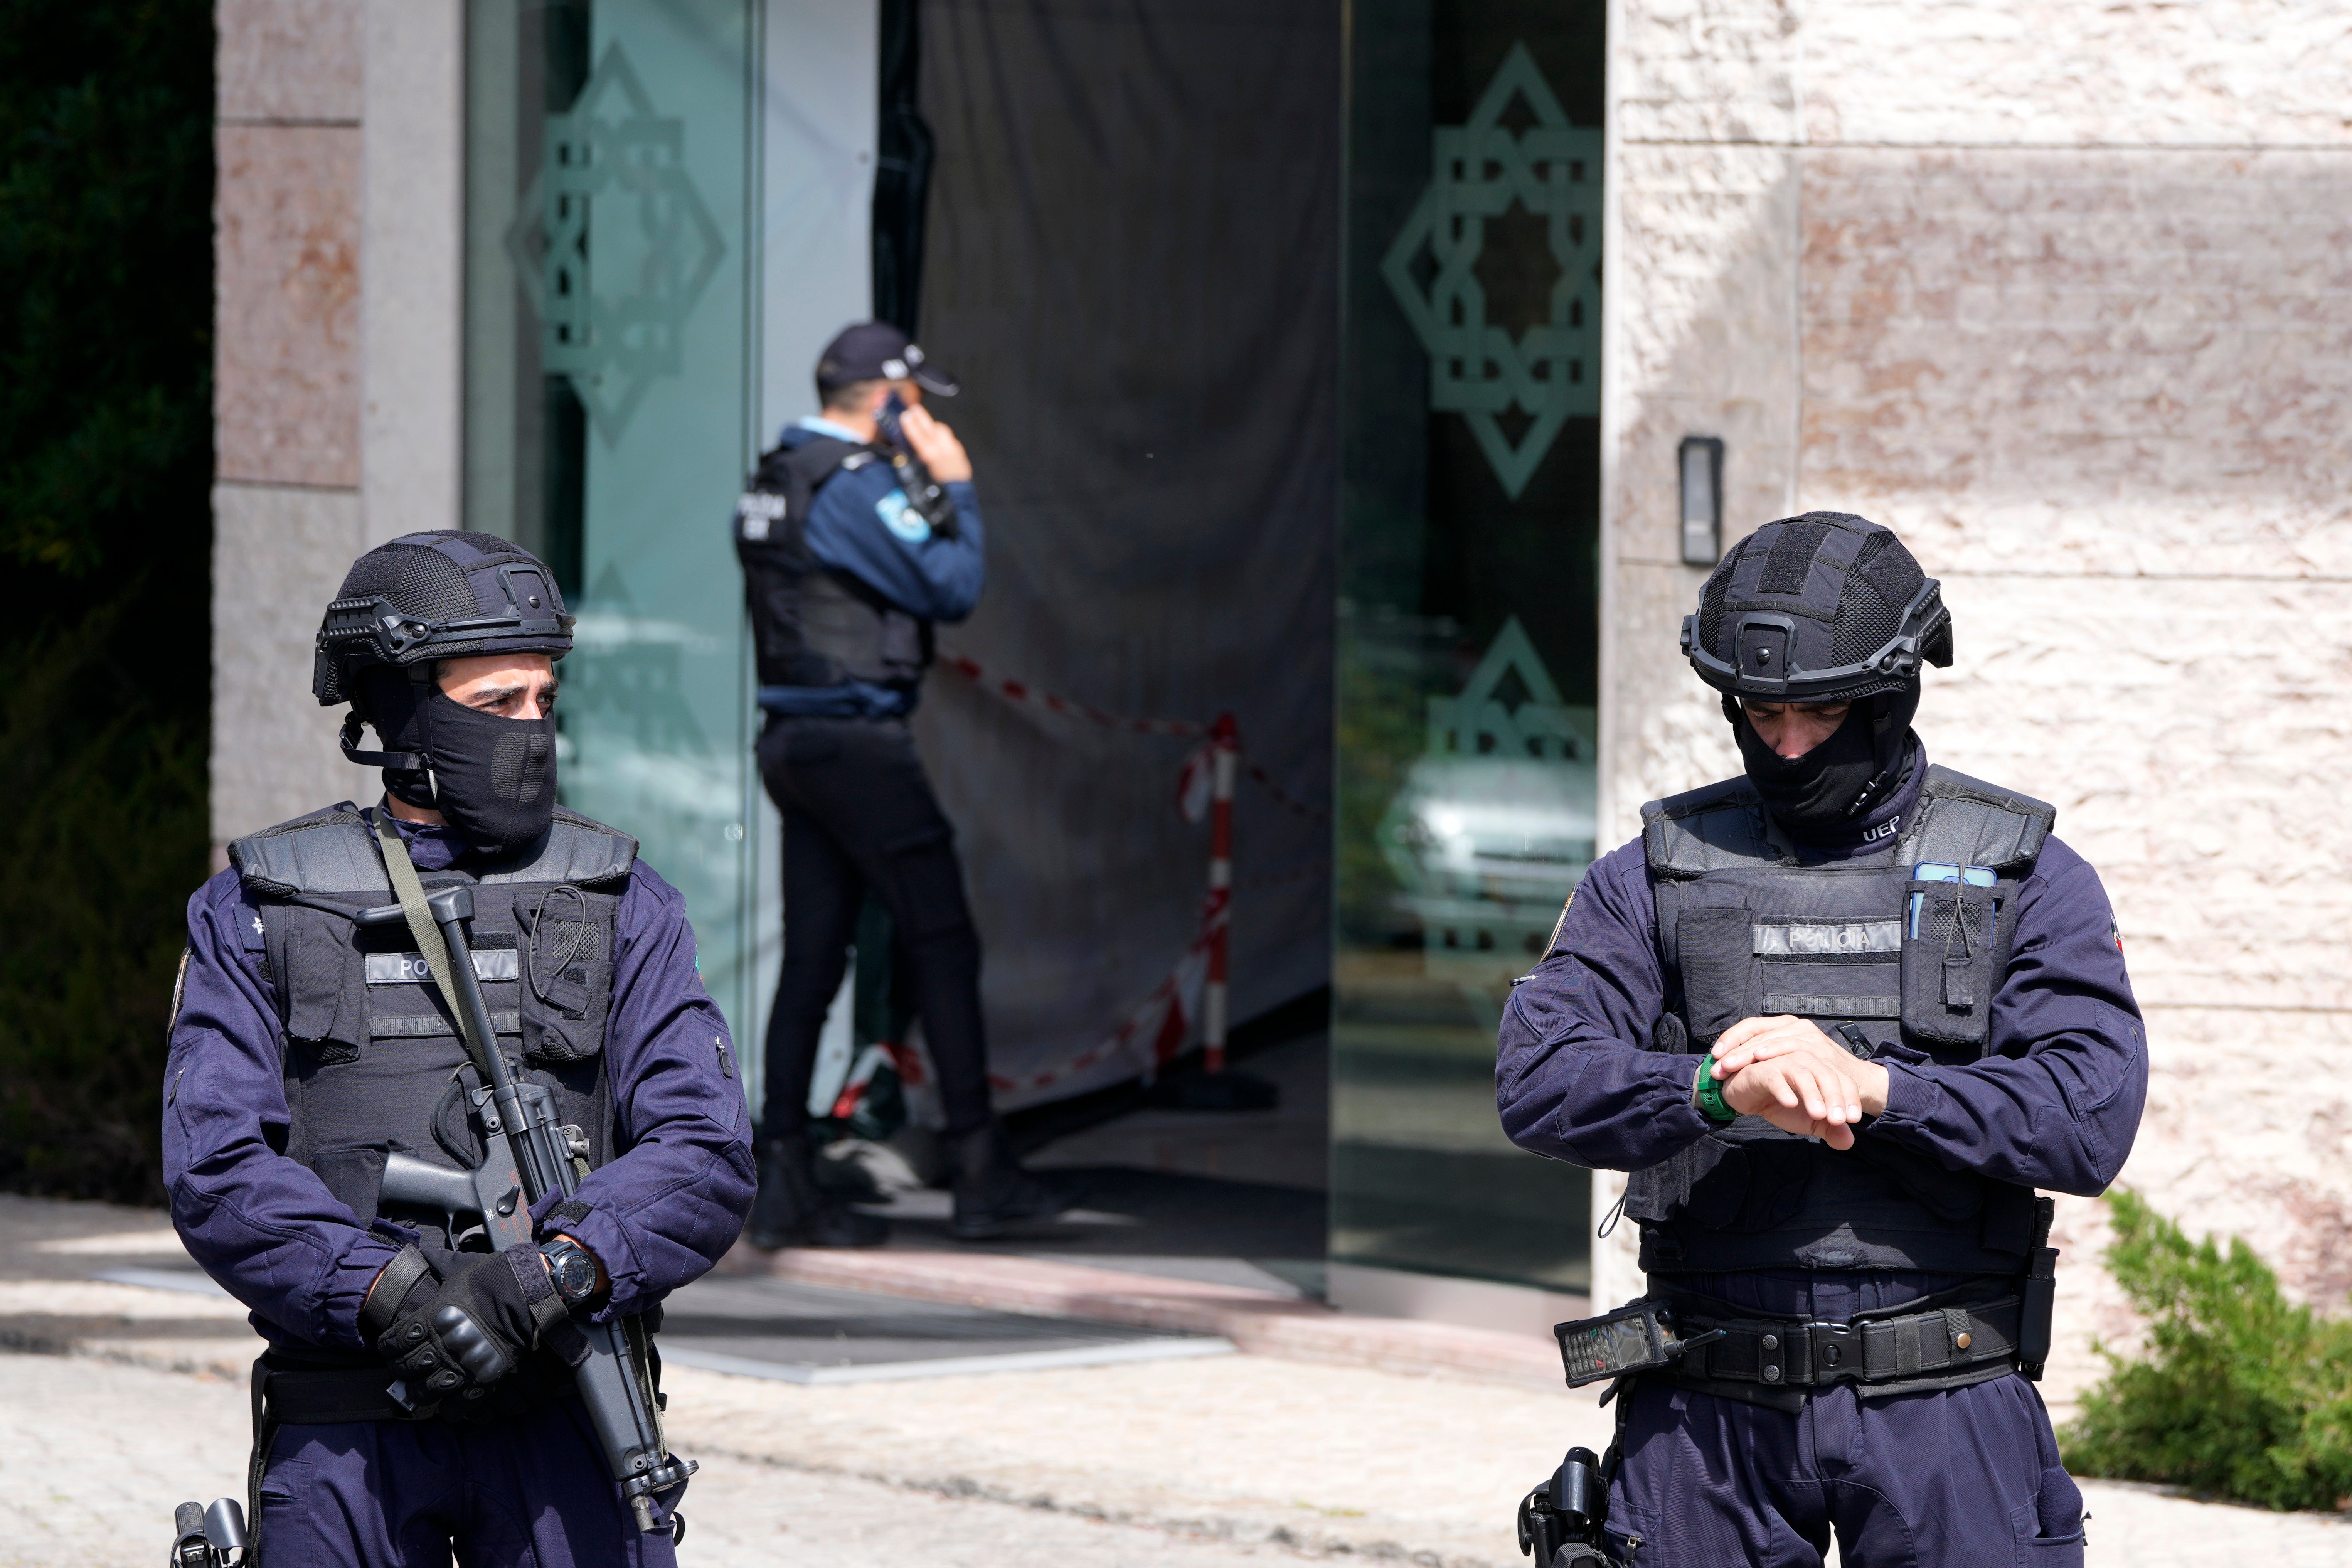 Police officers stand at the entrance of an Ismaili Muslim center in Lisbon, Portugal on Tuesday